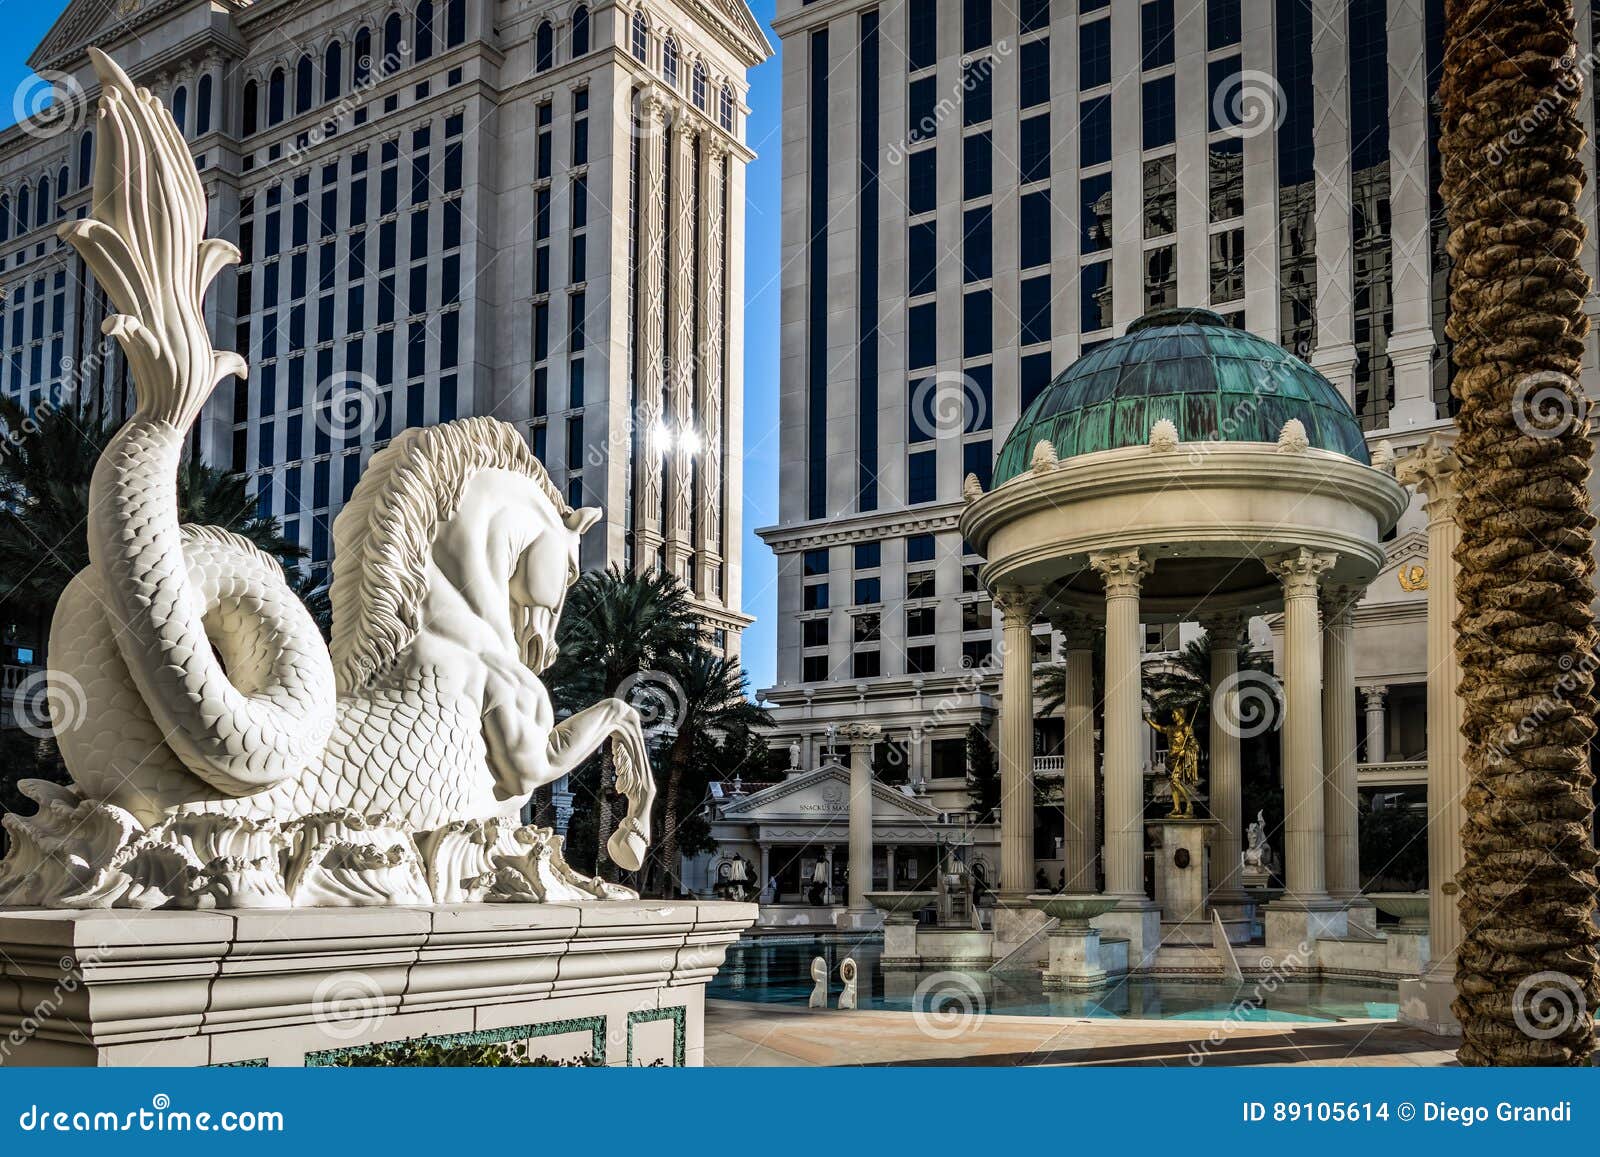 Caesars palace las vegas pool hi-res stock photography and images - Alamy